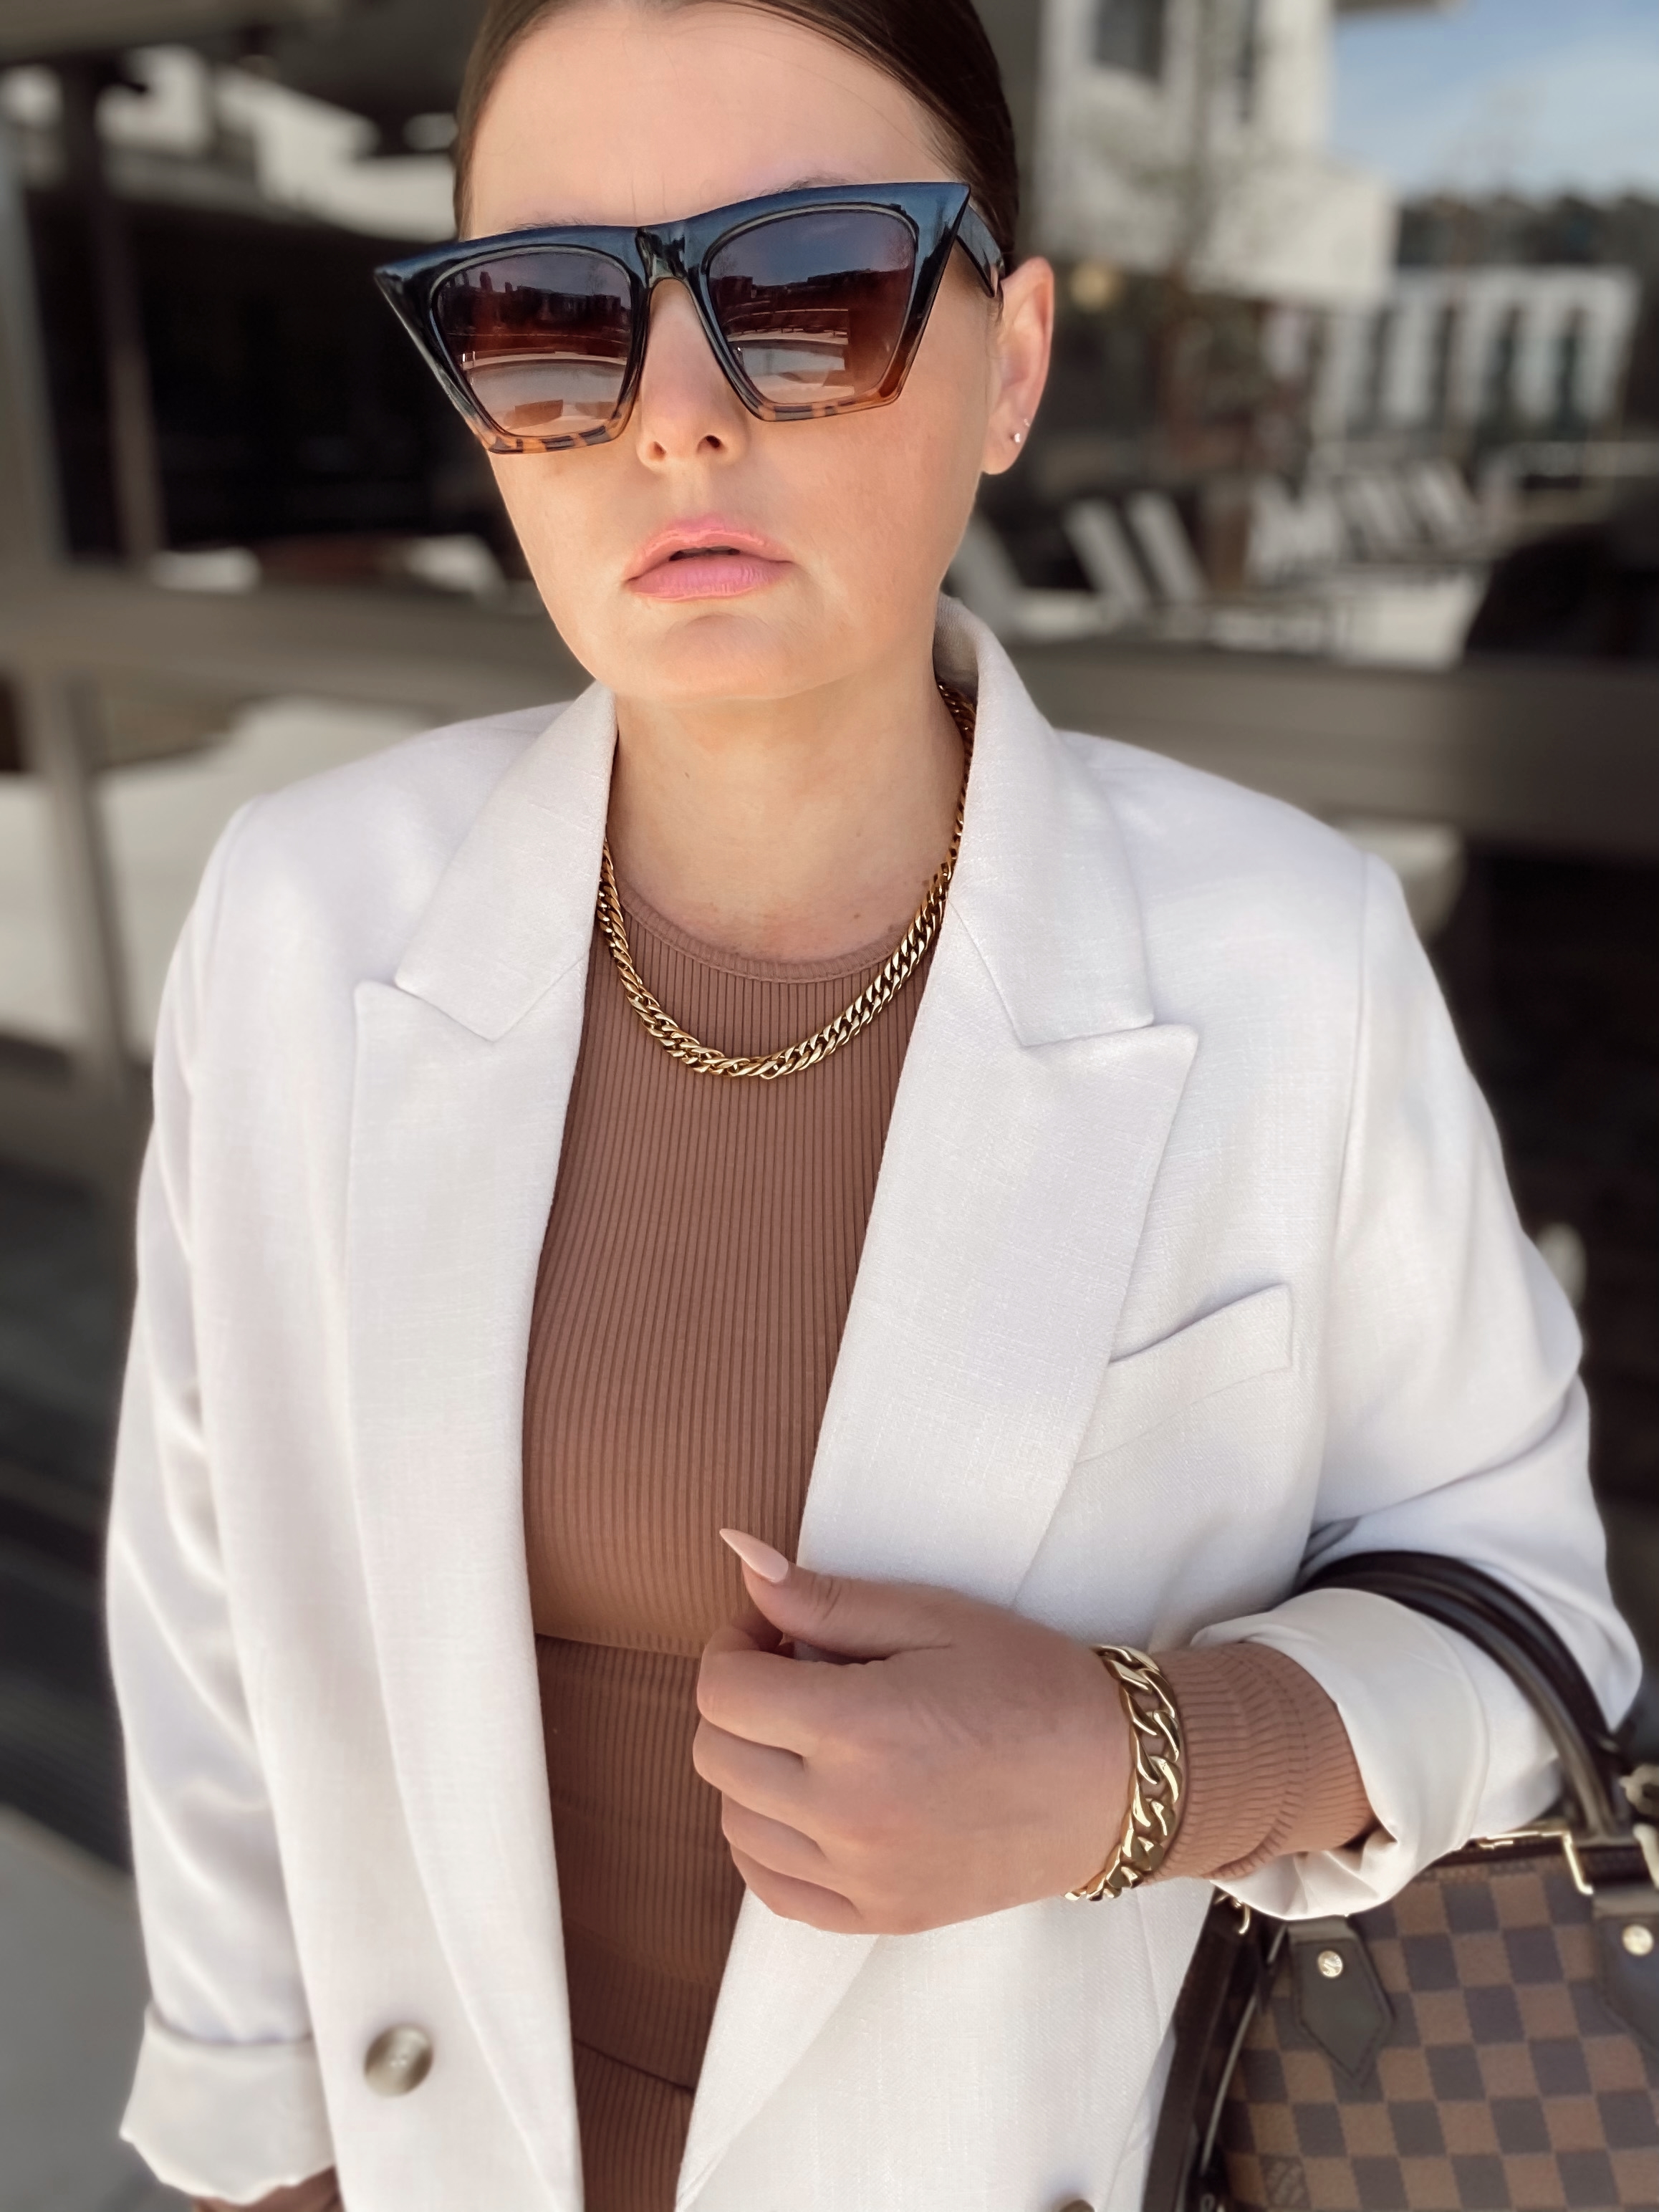 SPRING JEWELRY MUST HAVES WITH VICTORIA EMERSON: http://www.juliamarieb.com/2021/03/25/spring-jewelry-must-haves-with-victoria-emerson/.   @julia.marie.b